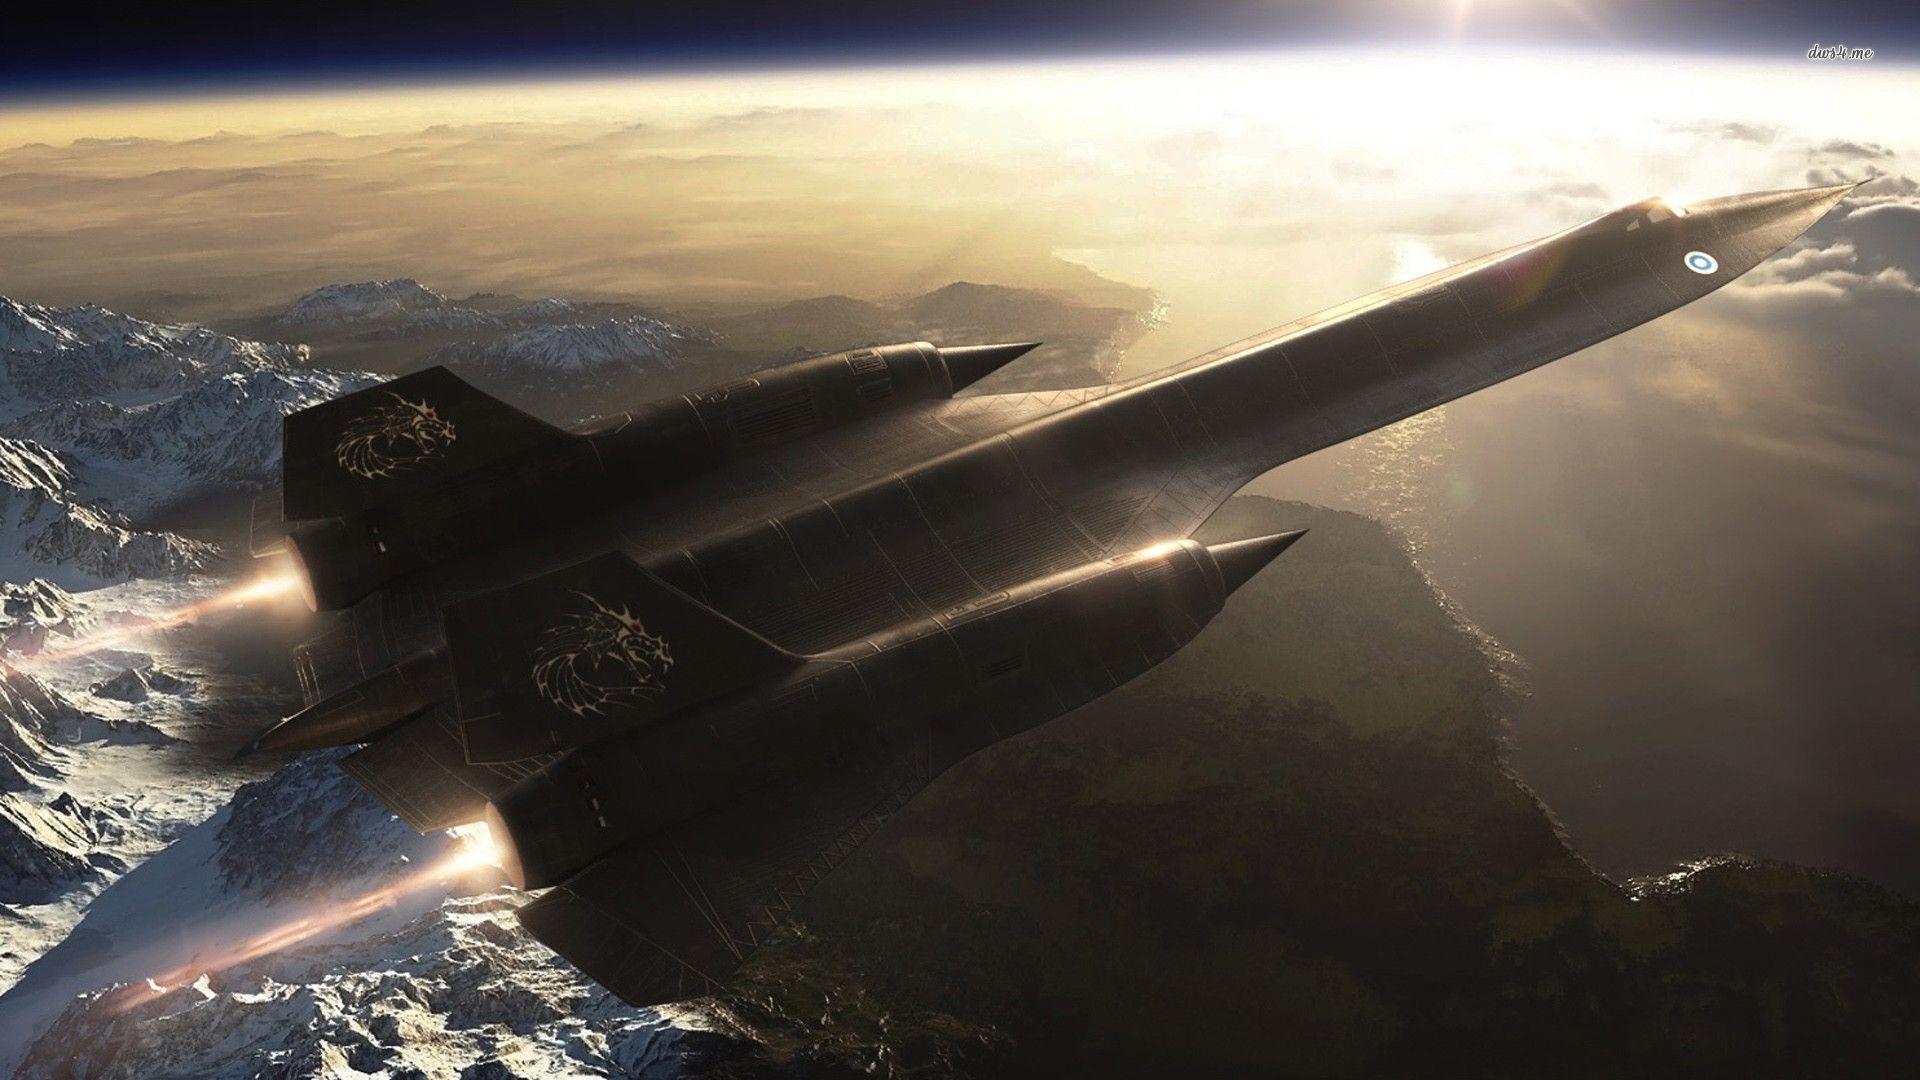 The SR-71 Was Close to Perfect | Air & Space Magazine| Smithsonian Magazine